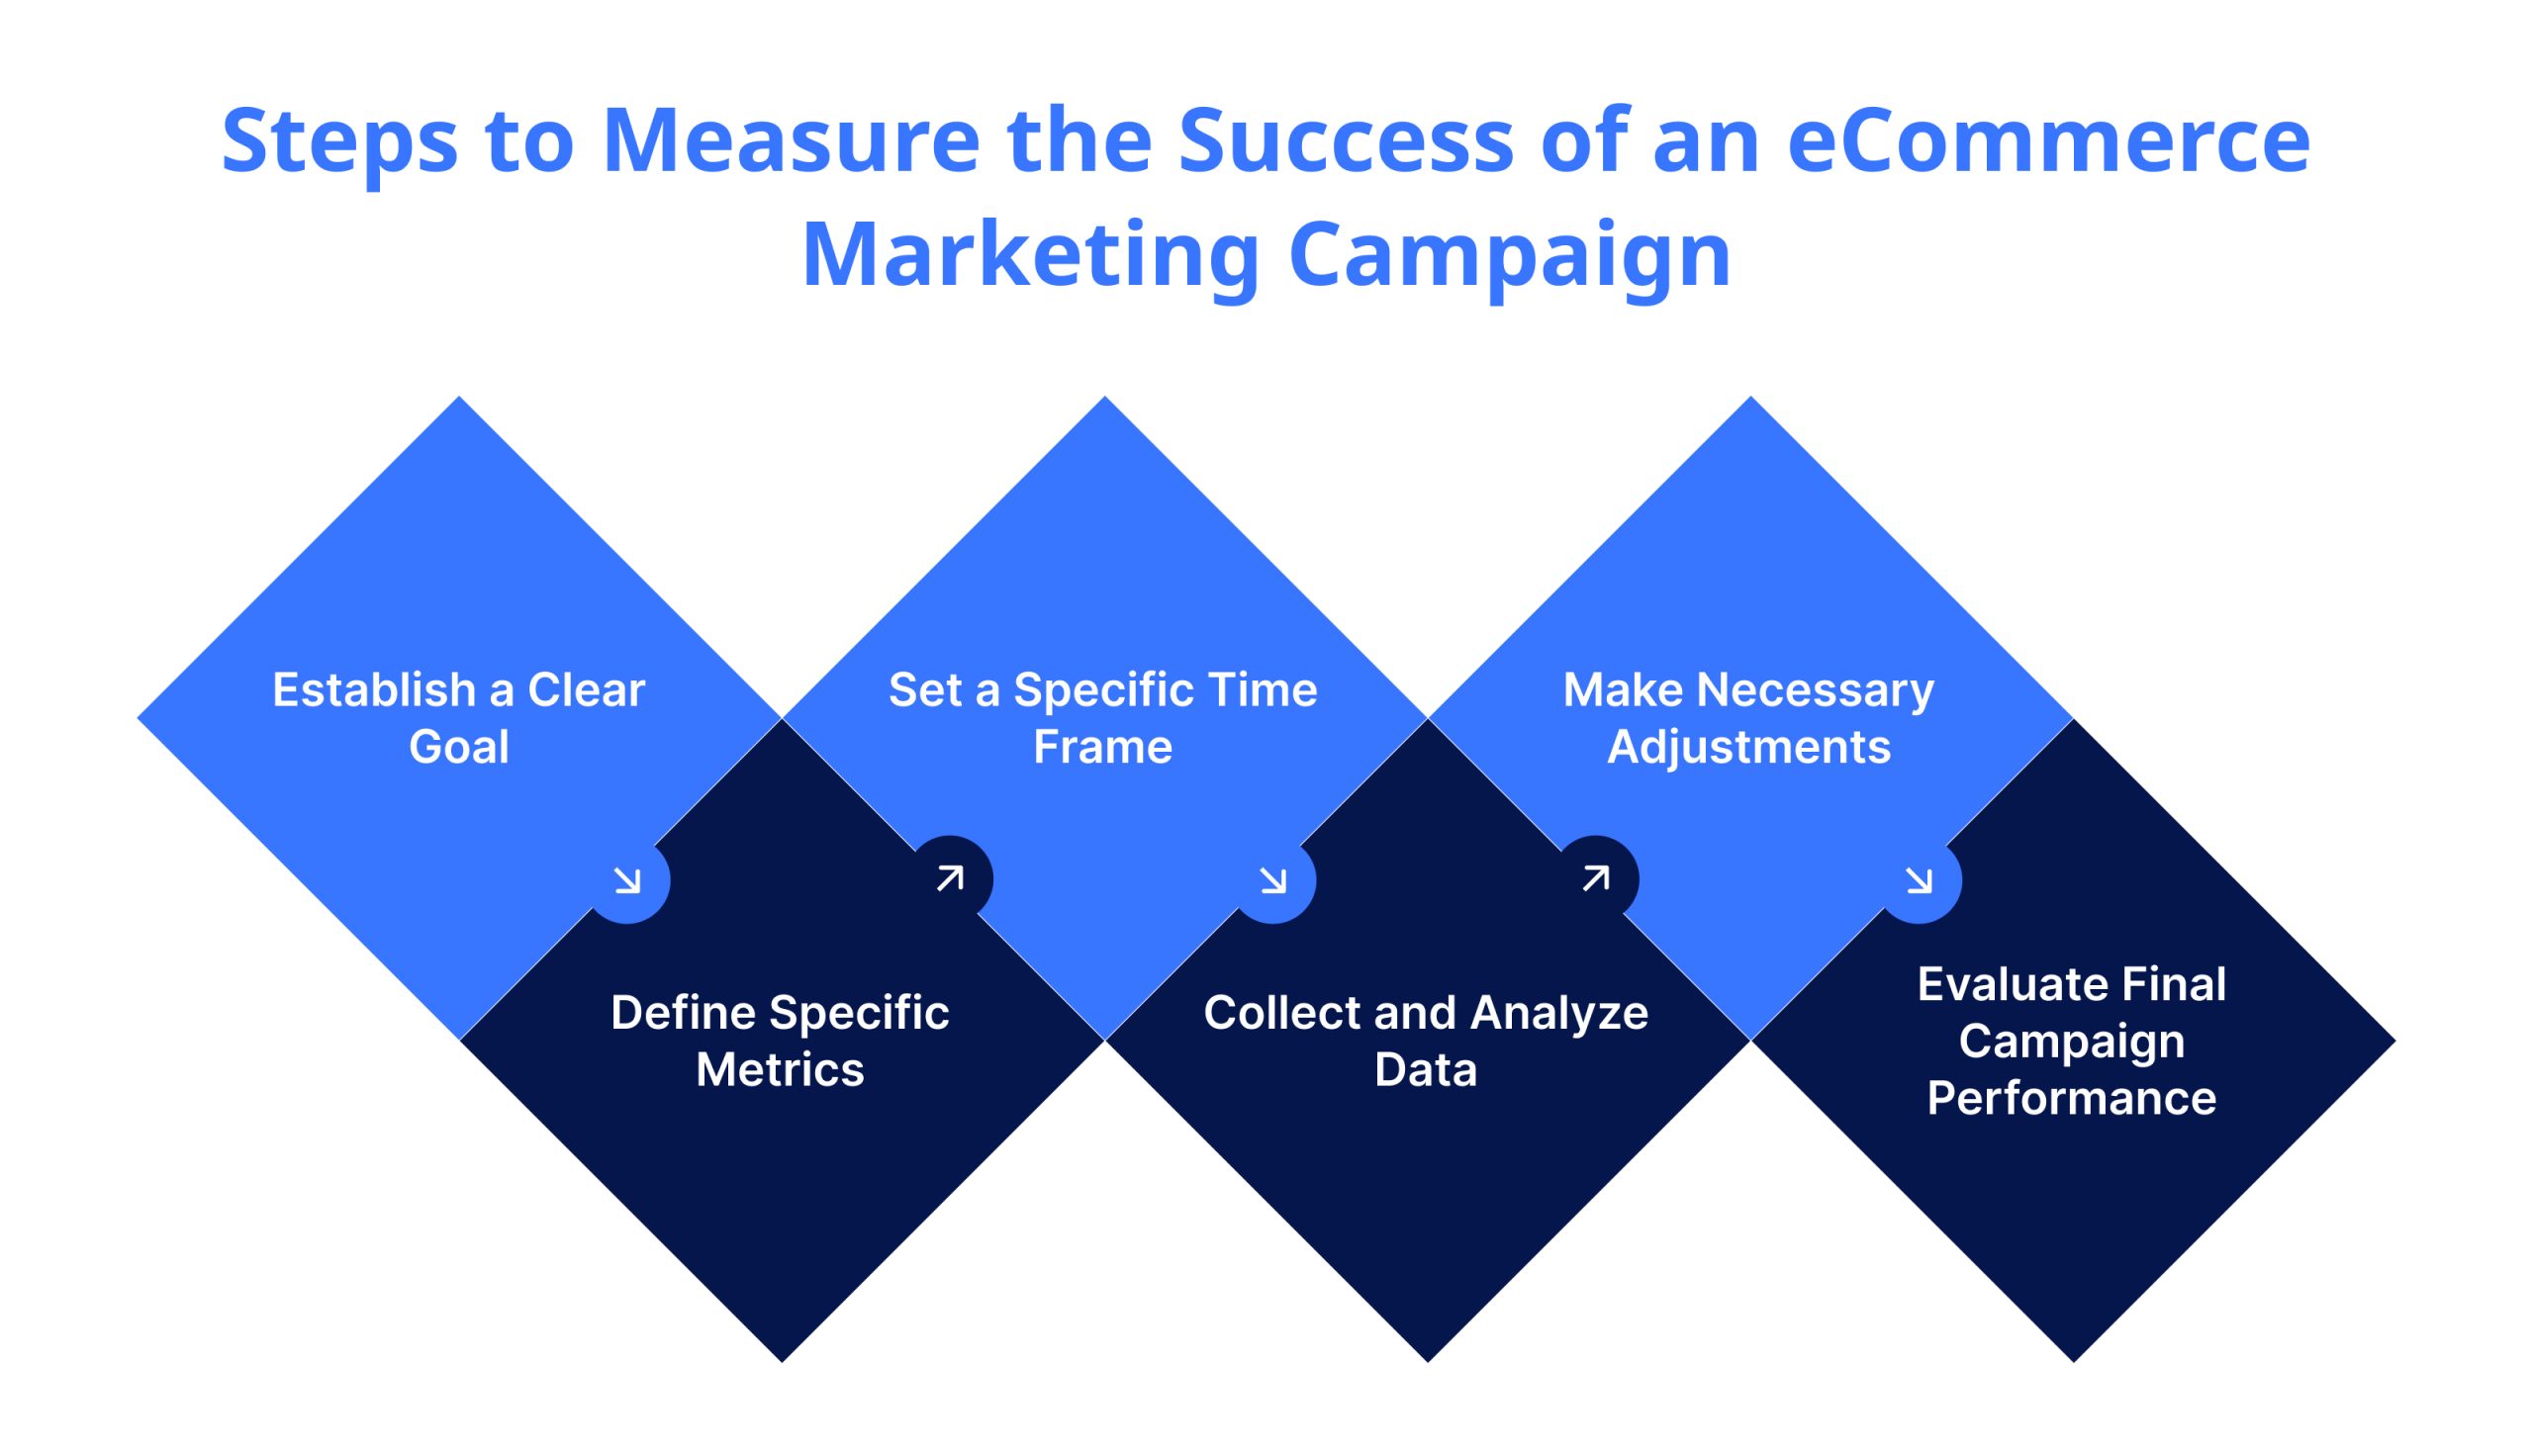 Steps to Measure the Success of an eCommerce Marketing Campaign